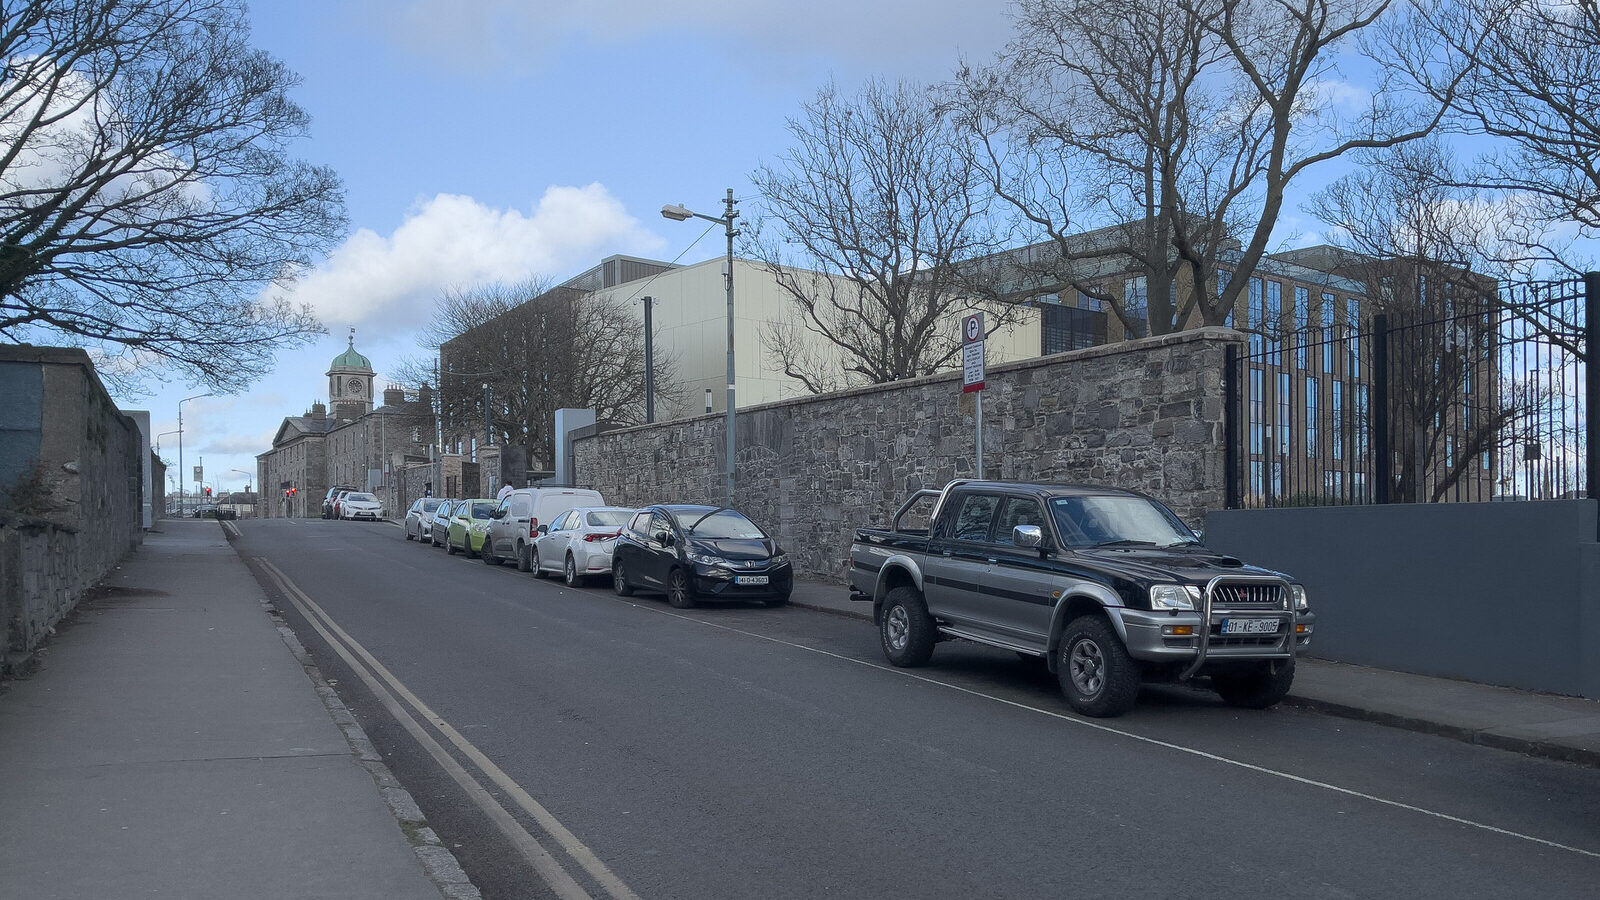 EXPLORING GRANGEGORMAN LOWER [WHICH IS BOTH A STREET AND AN AREA OR DISTRICT]-229038-1